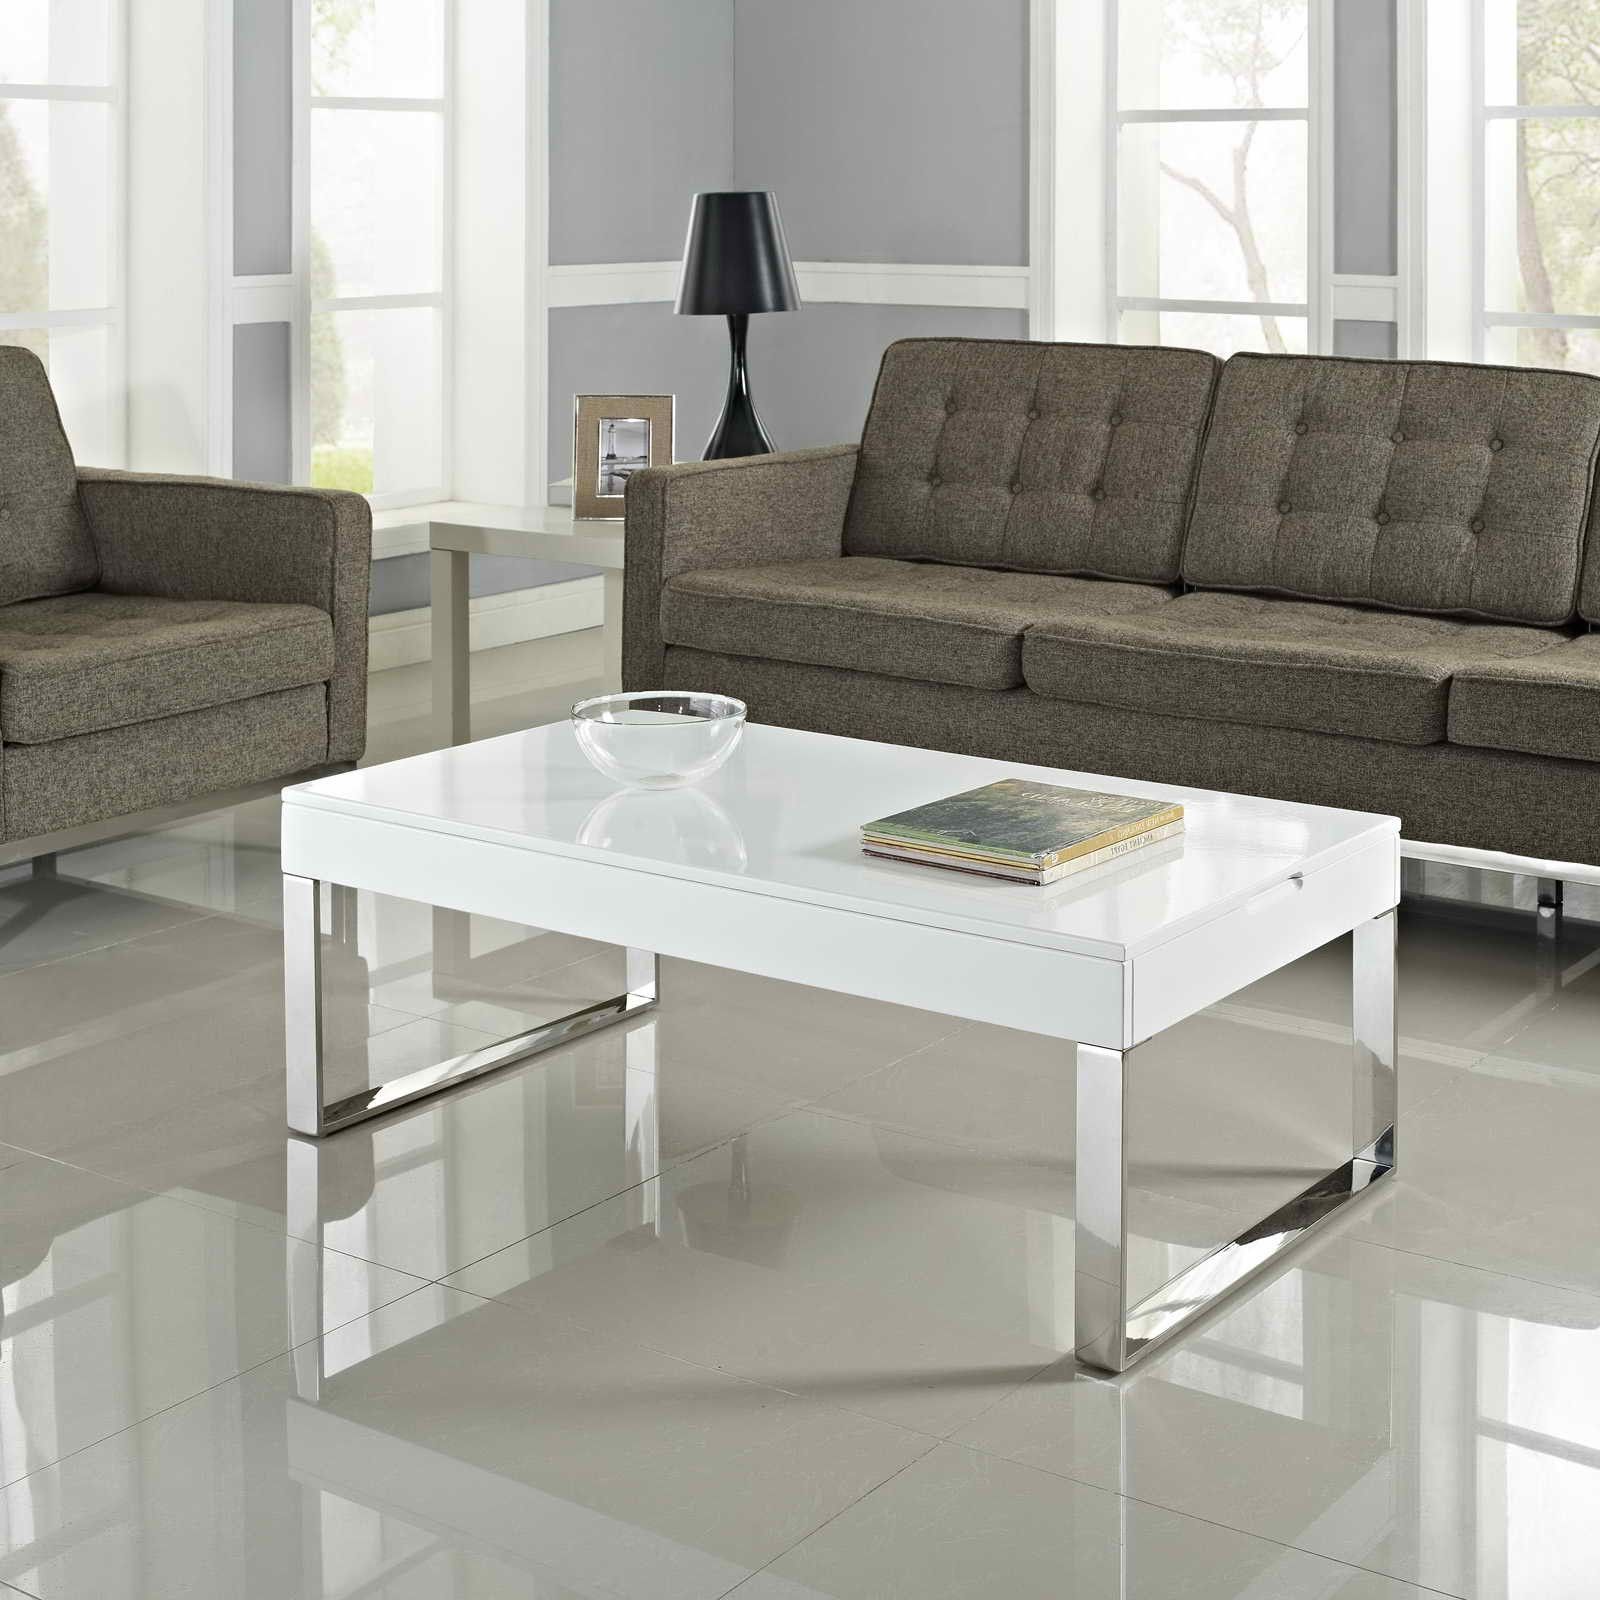 Amazing Lucite Coffee Table Ikea – Homesfeed Intended For Best And Newest Acrylic Coffee Tables (View 2 of 10)